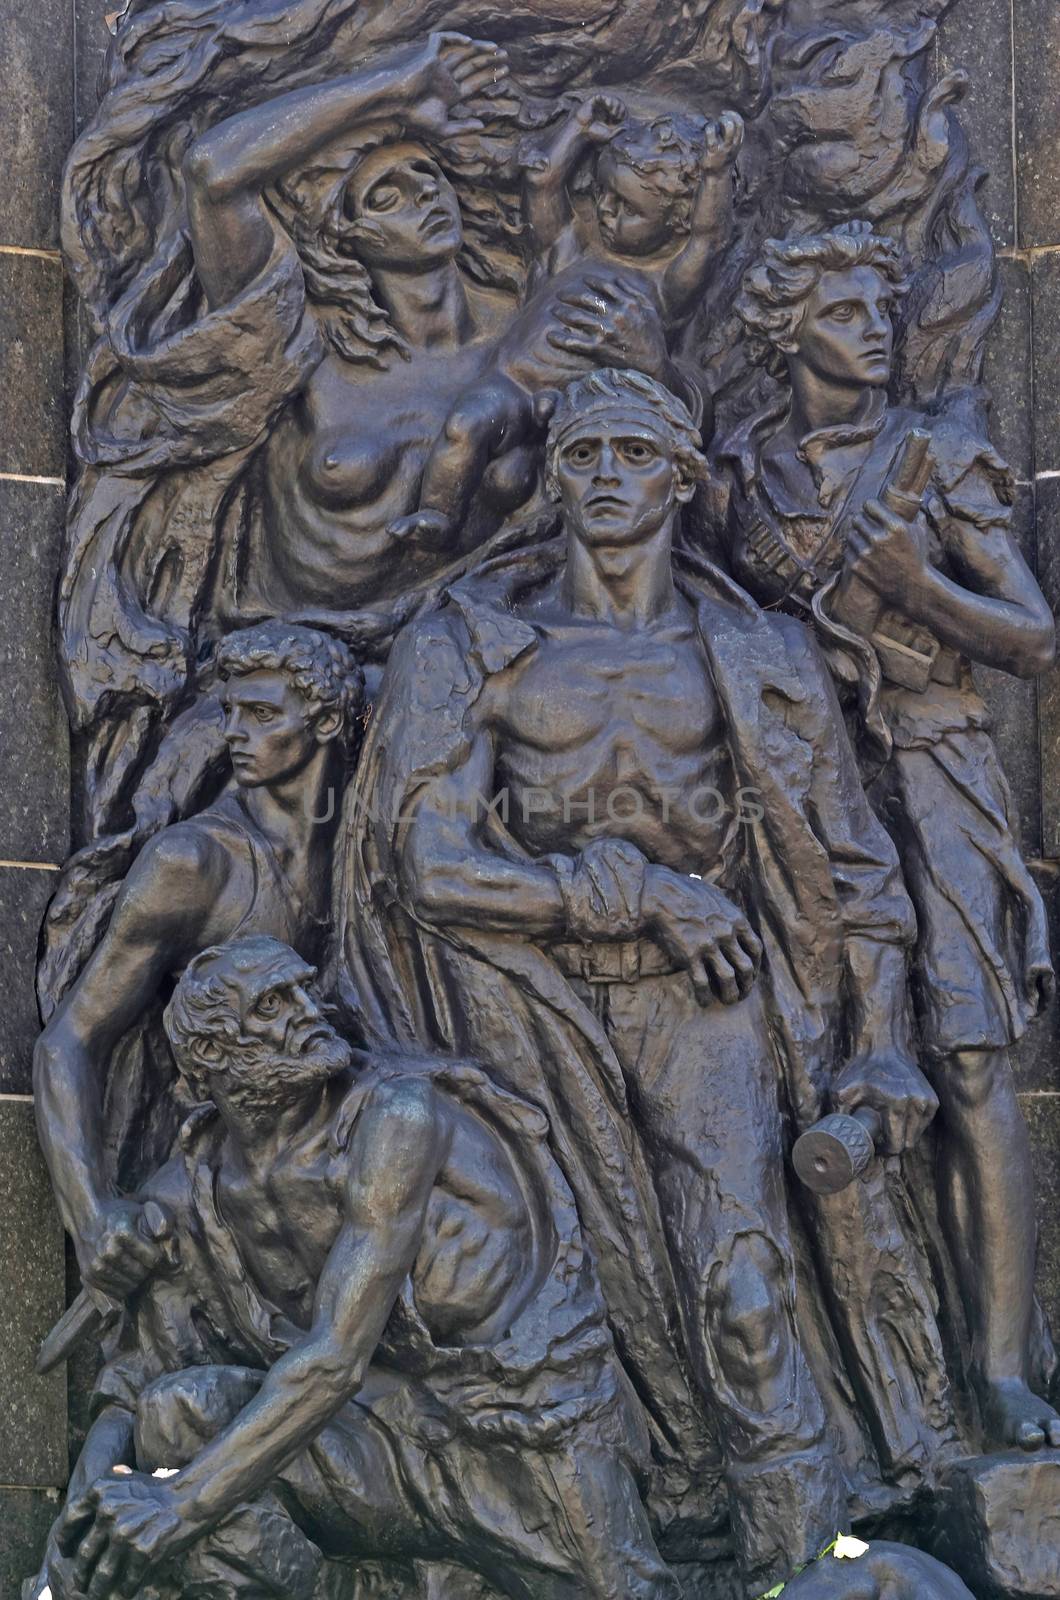 Front of the Nathan Rappaport's Warsaw Ghetto Monument, constructed in 1948 in commemoration of the Warsaw Ghetto Uprising in 1943. The bronze relief depicts the heroism of the Jewish resistance fighters.